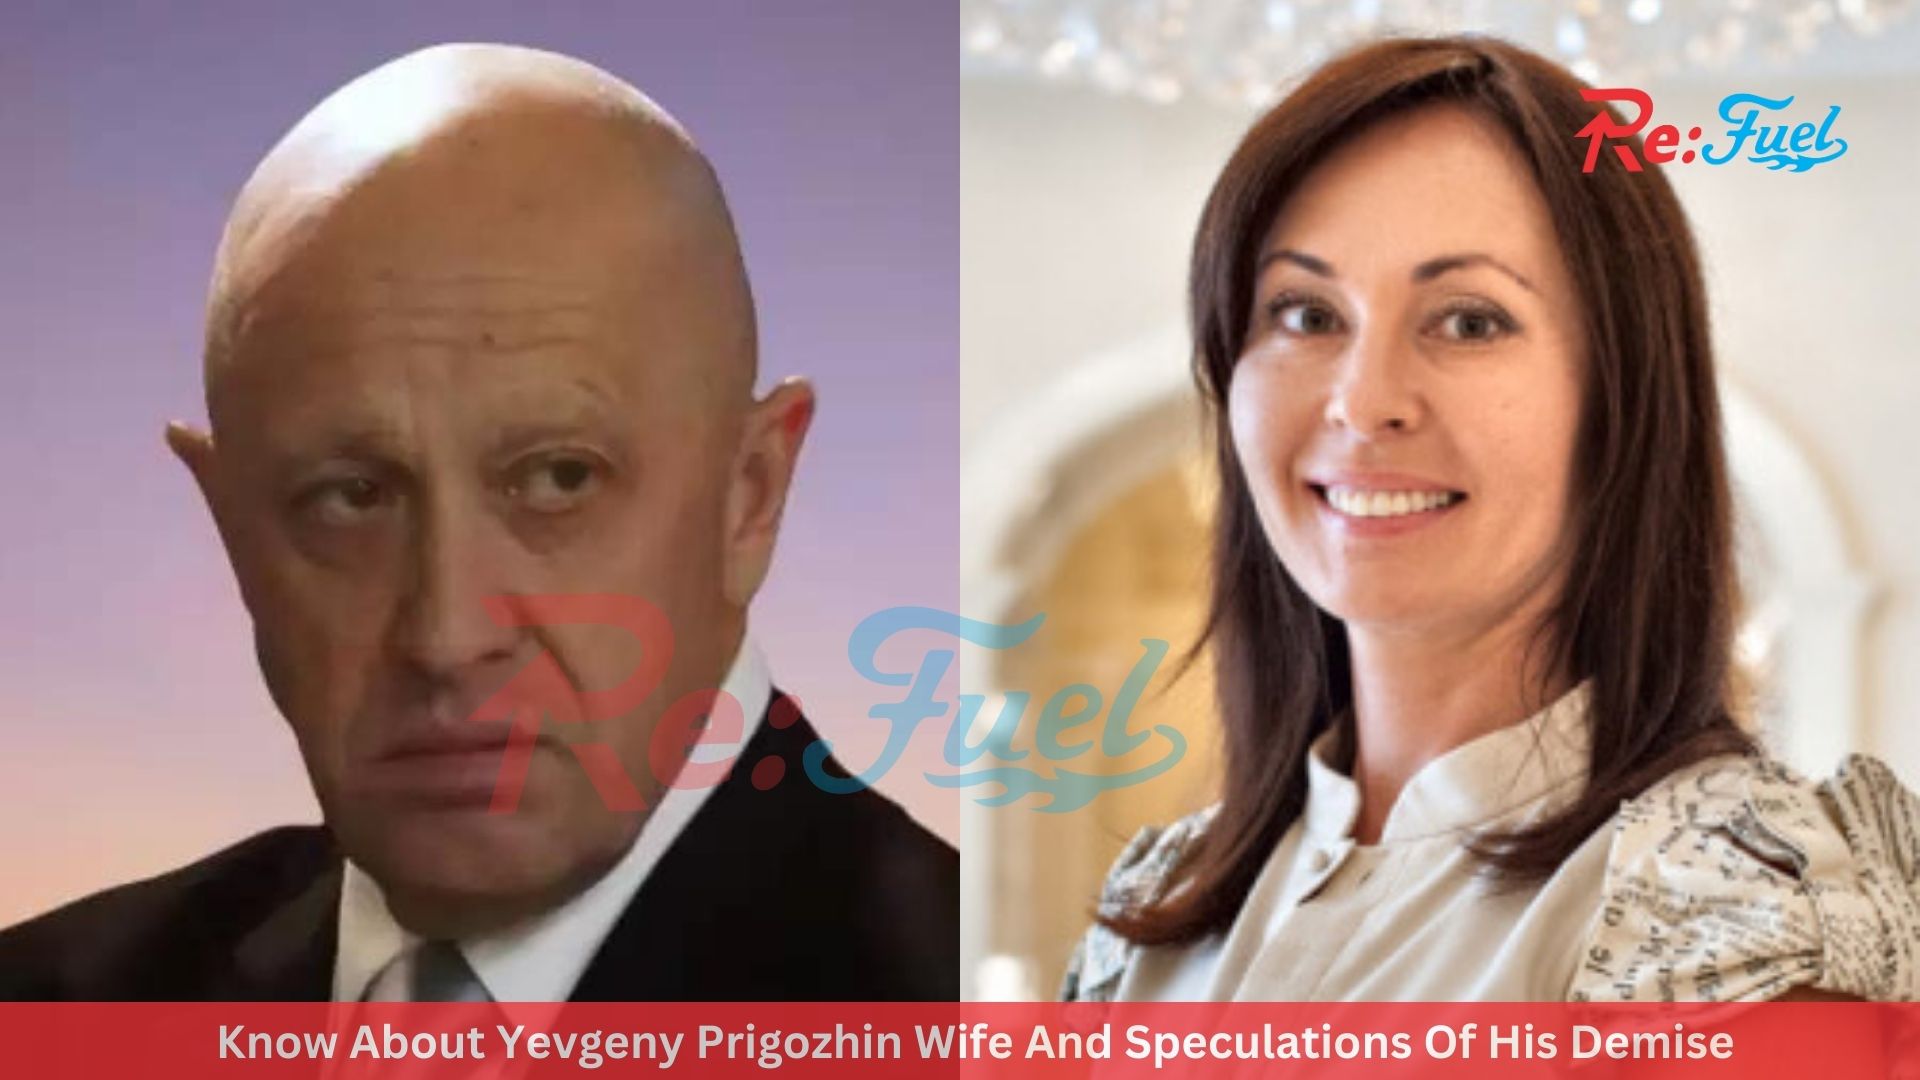 Know About Yevgeny Prigozhin Wife And Speculations Of His Demise